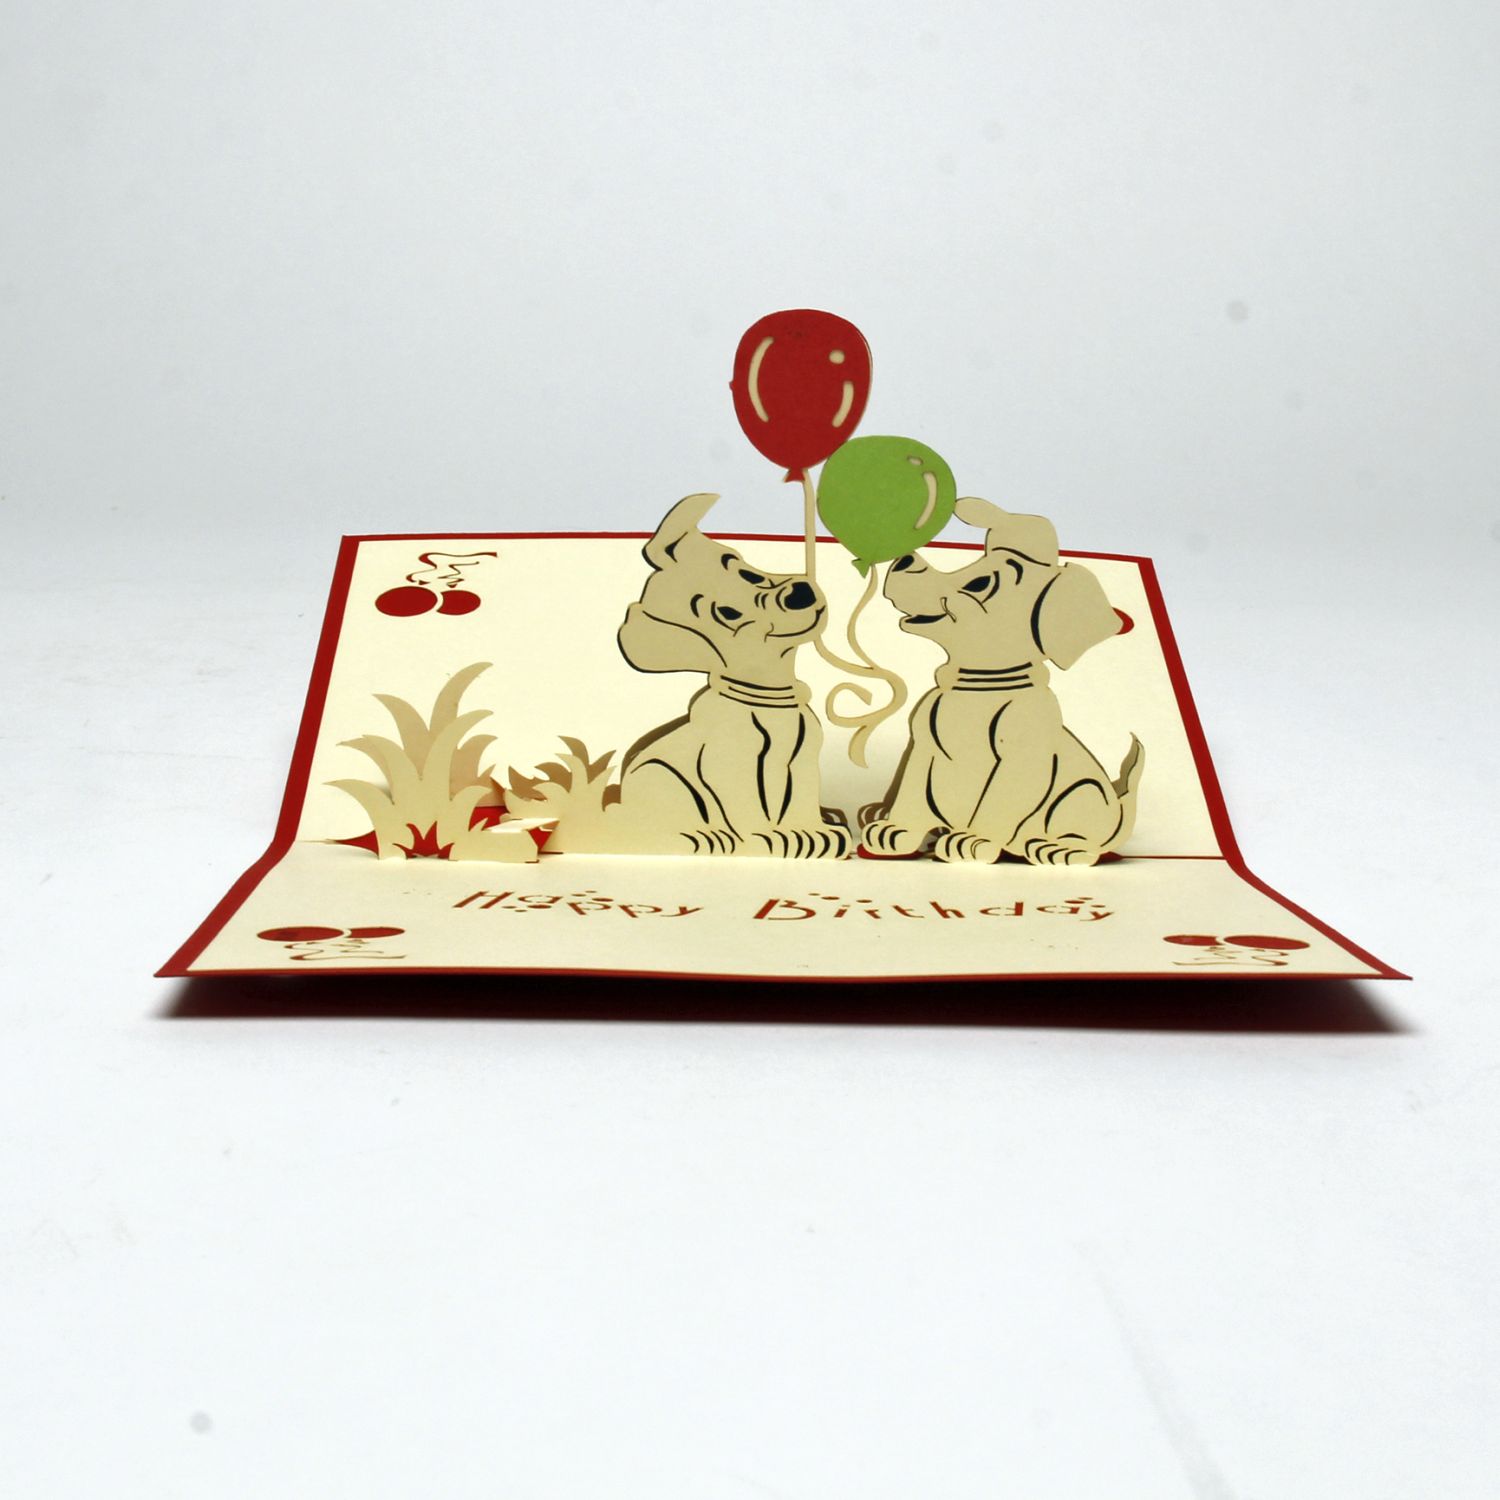 Roses without Thorns: Birthday Dogs Product Image 1 of 2